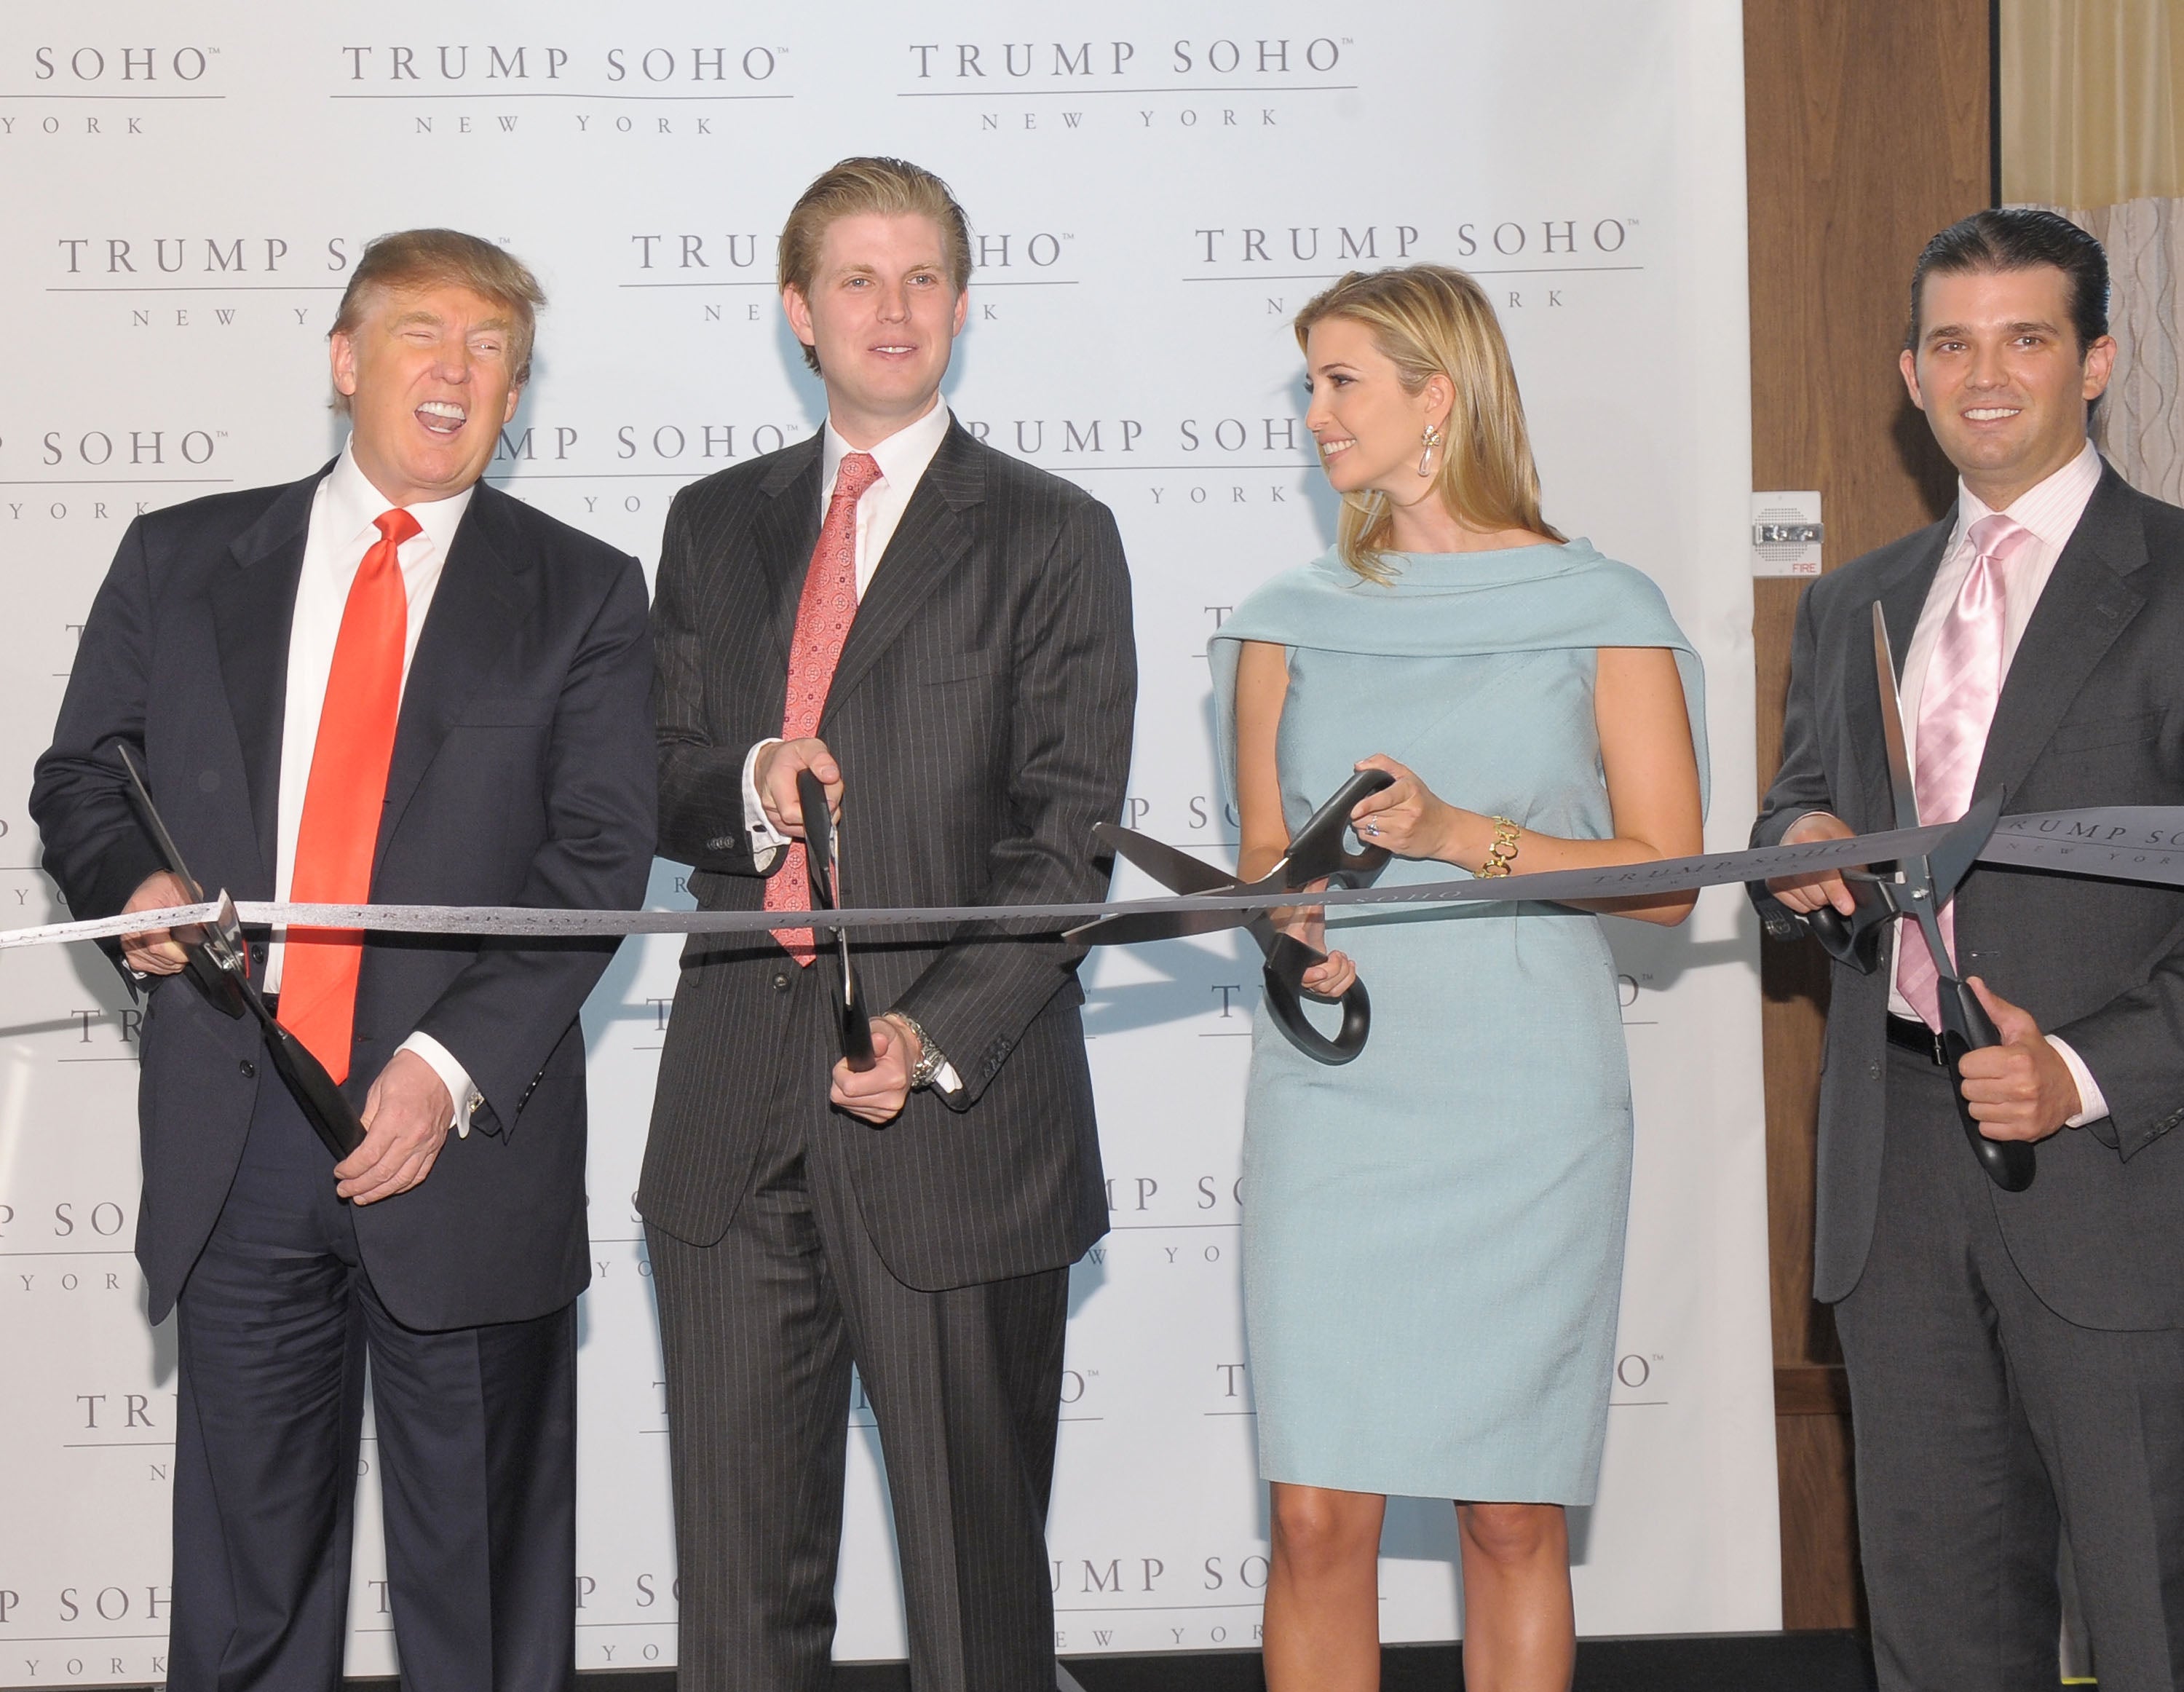 Donald Trump and his children Eric Trump, Ivanka Trump and Donald Trump Jr attend the ribbon cutting ceremony for Trump SoHo New York in April 2010